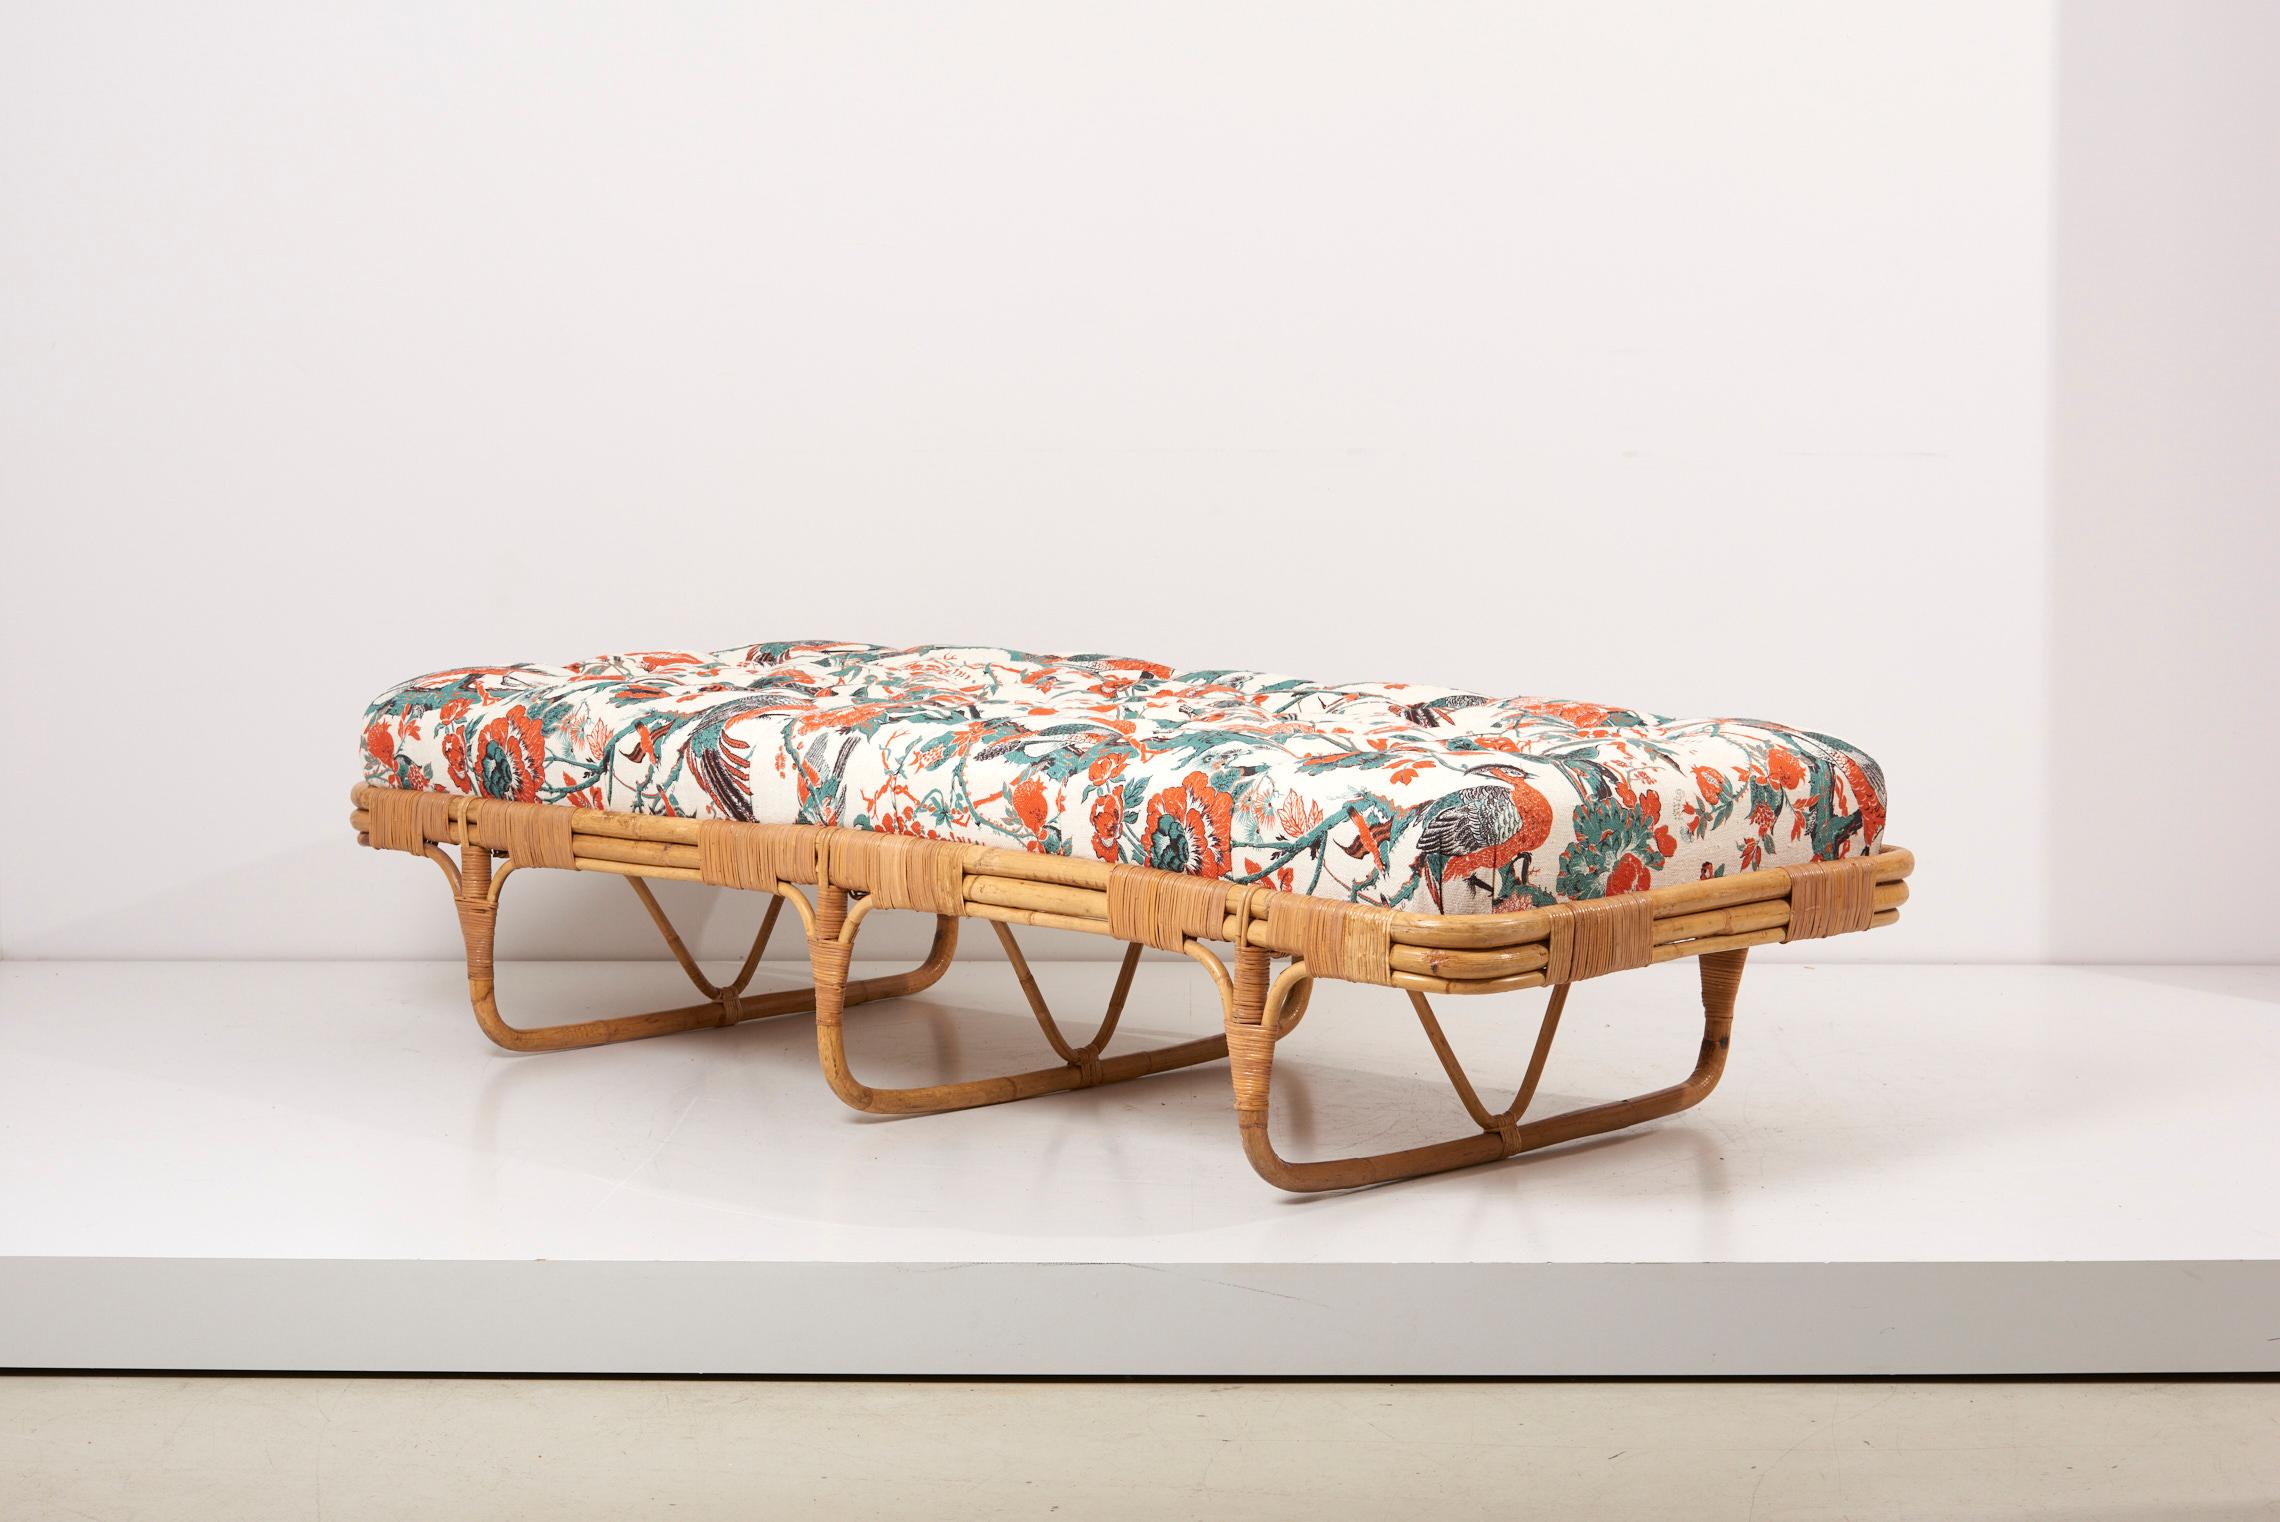 1950s basket daybed in a Josef Frank style fabric.